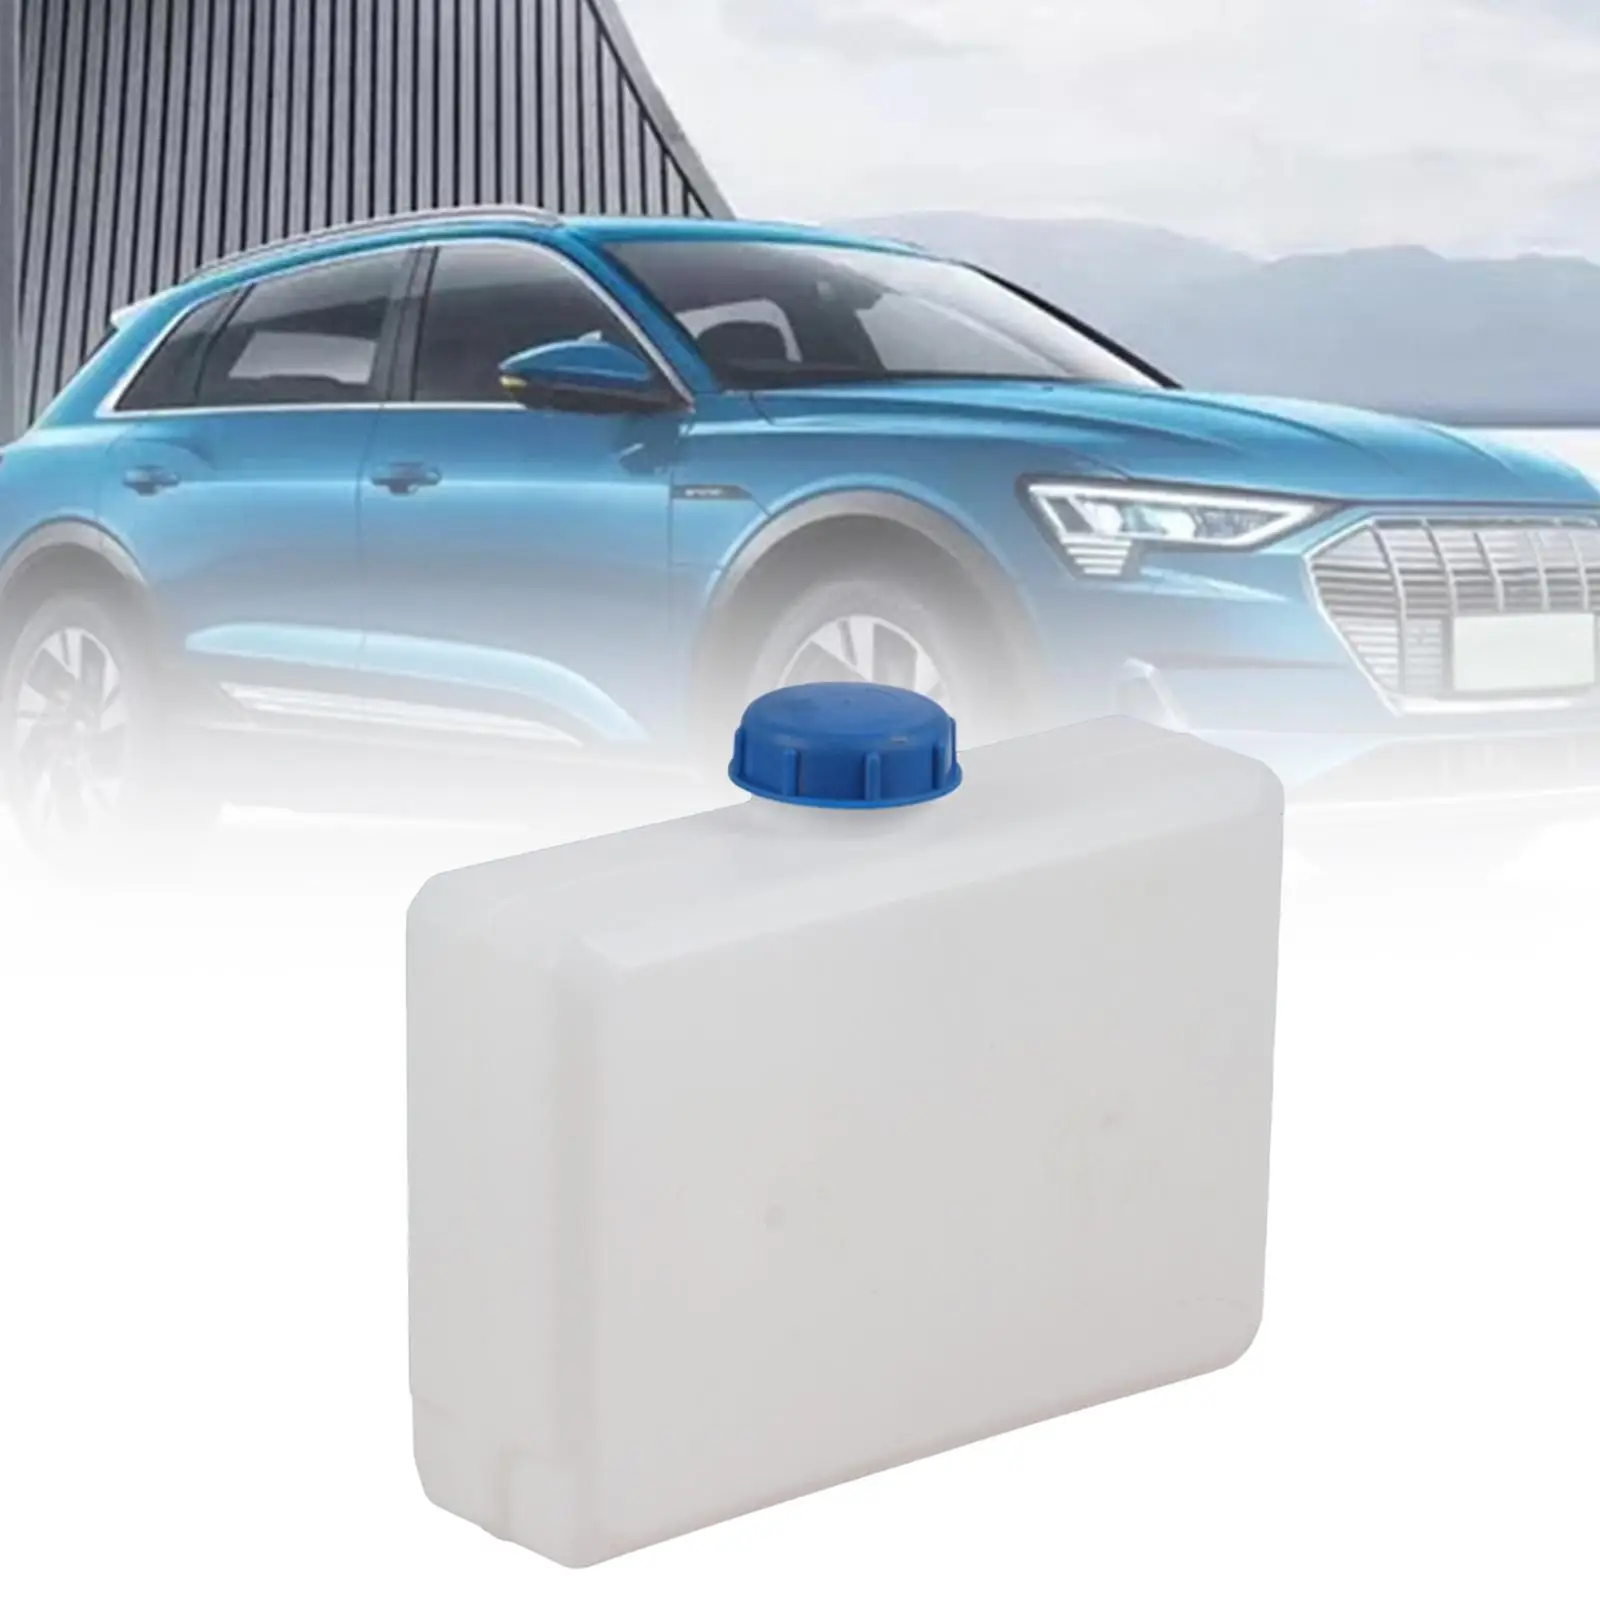 Gasoline Petrol Tank Portable Heat Resistant for Air Parking Heater Accessory